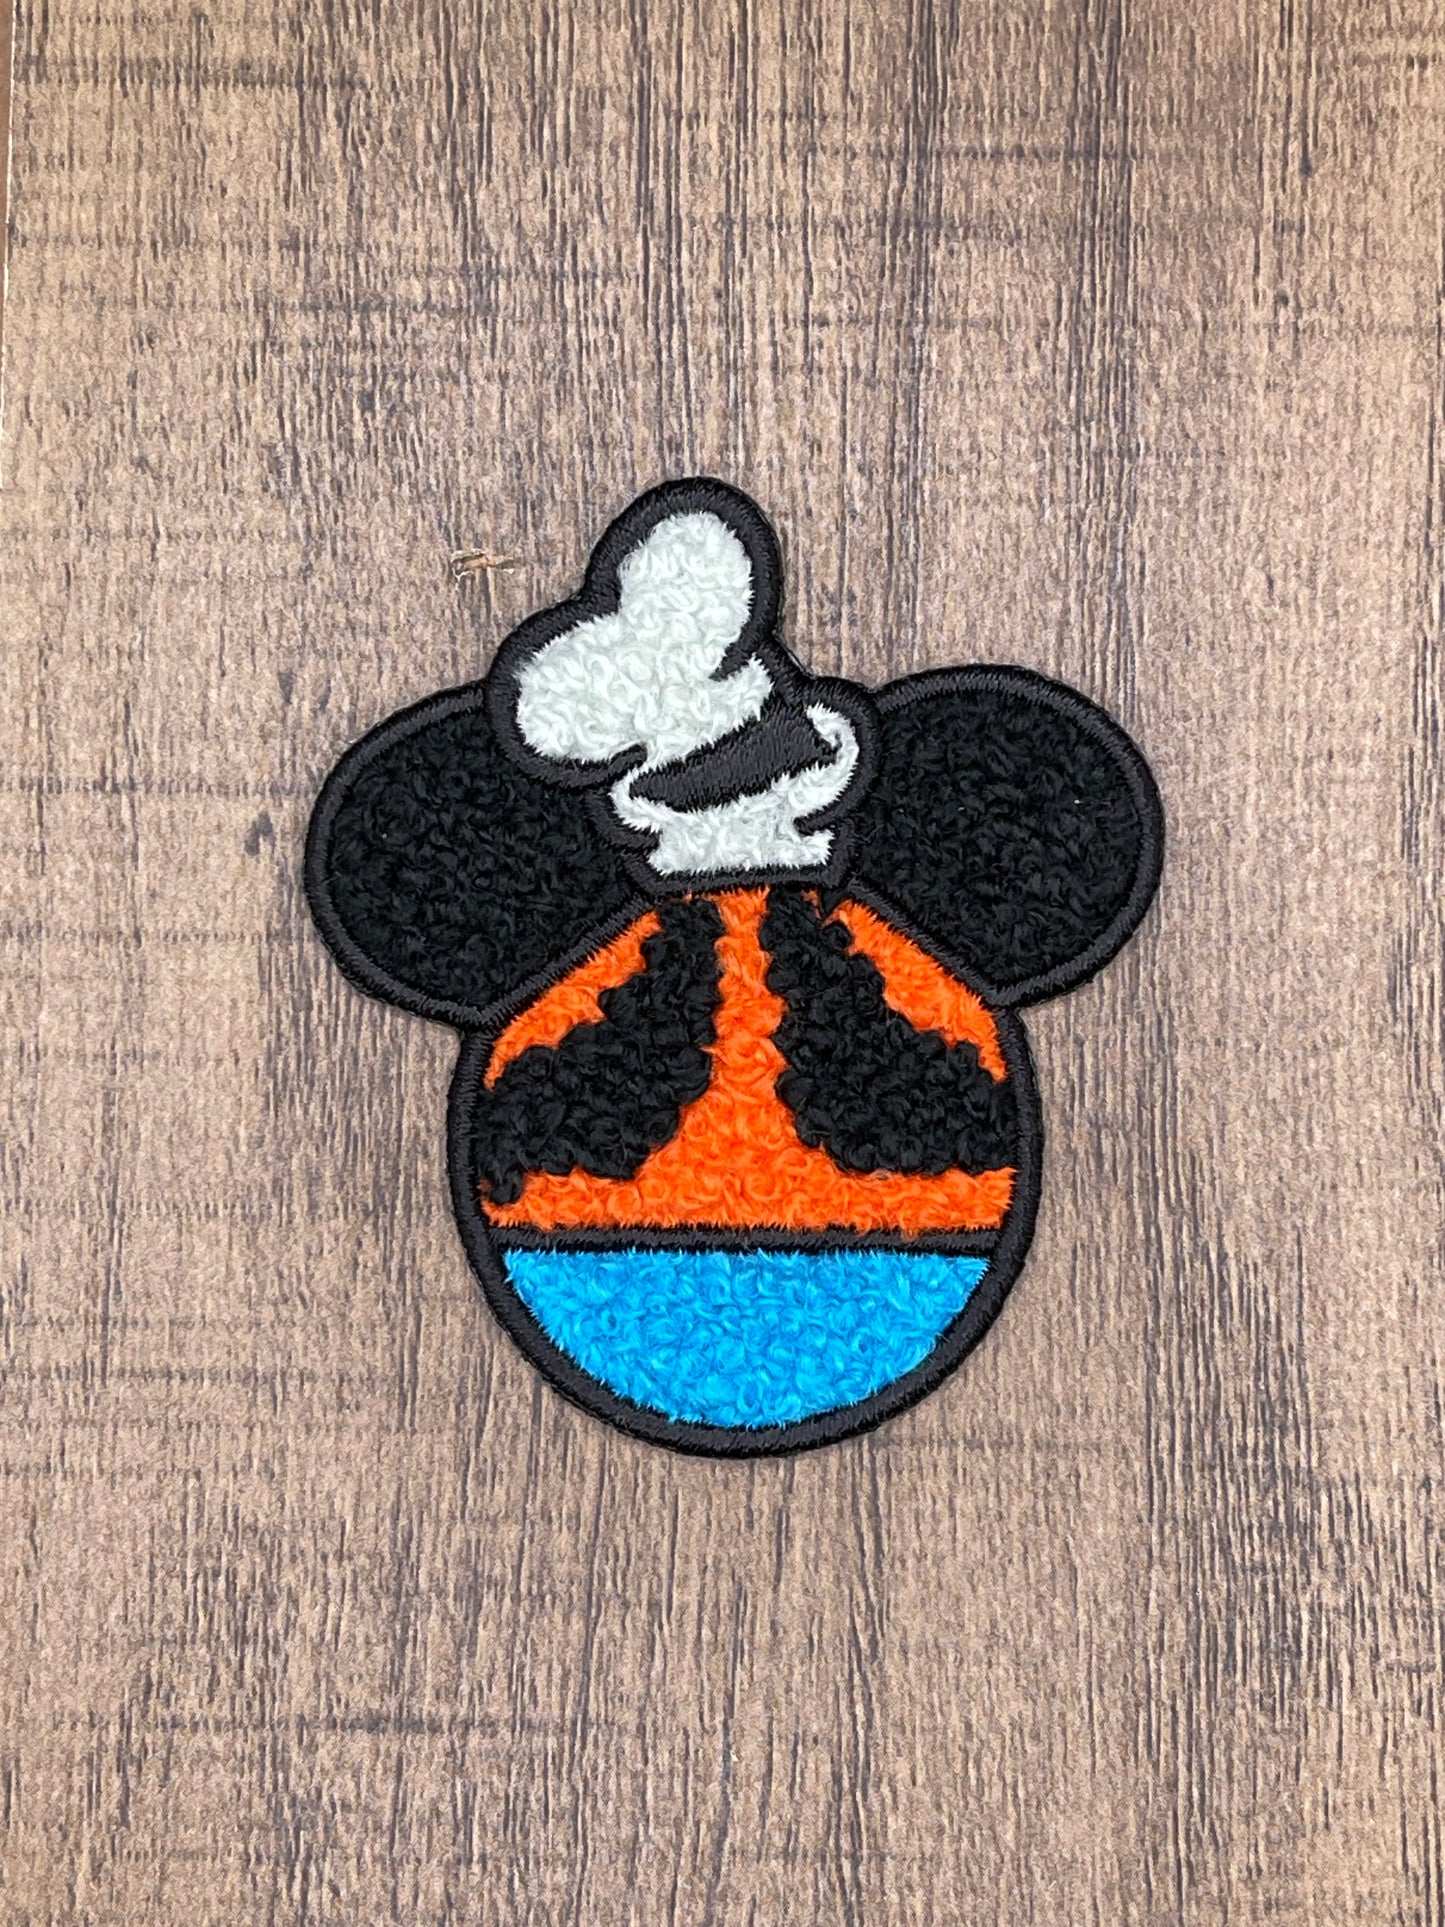 Magical Pals Chenille Patches